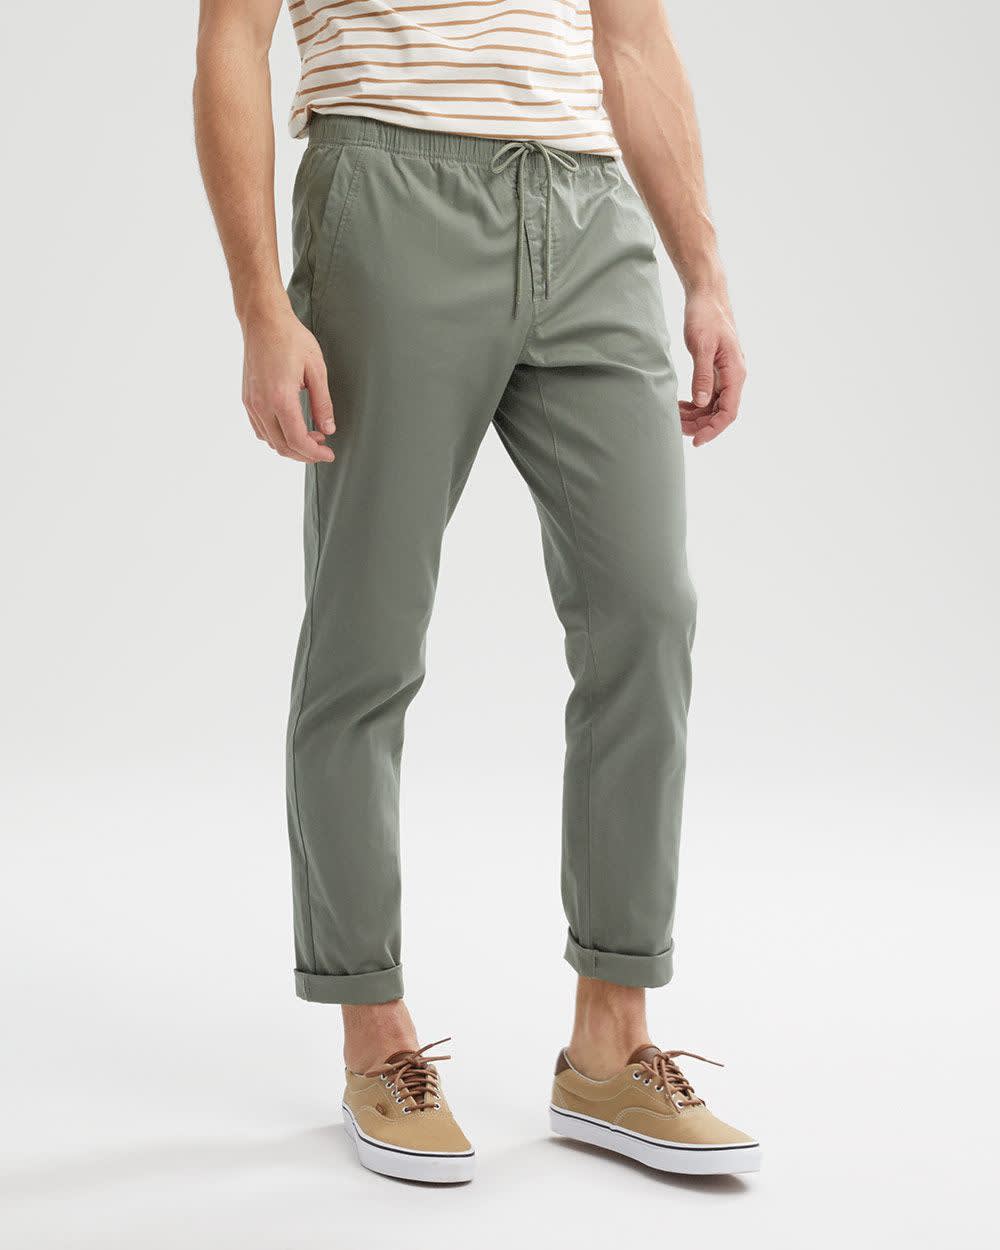 Casual Pant with Elastic Waistband and Drawstring - 32